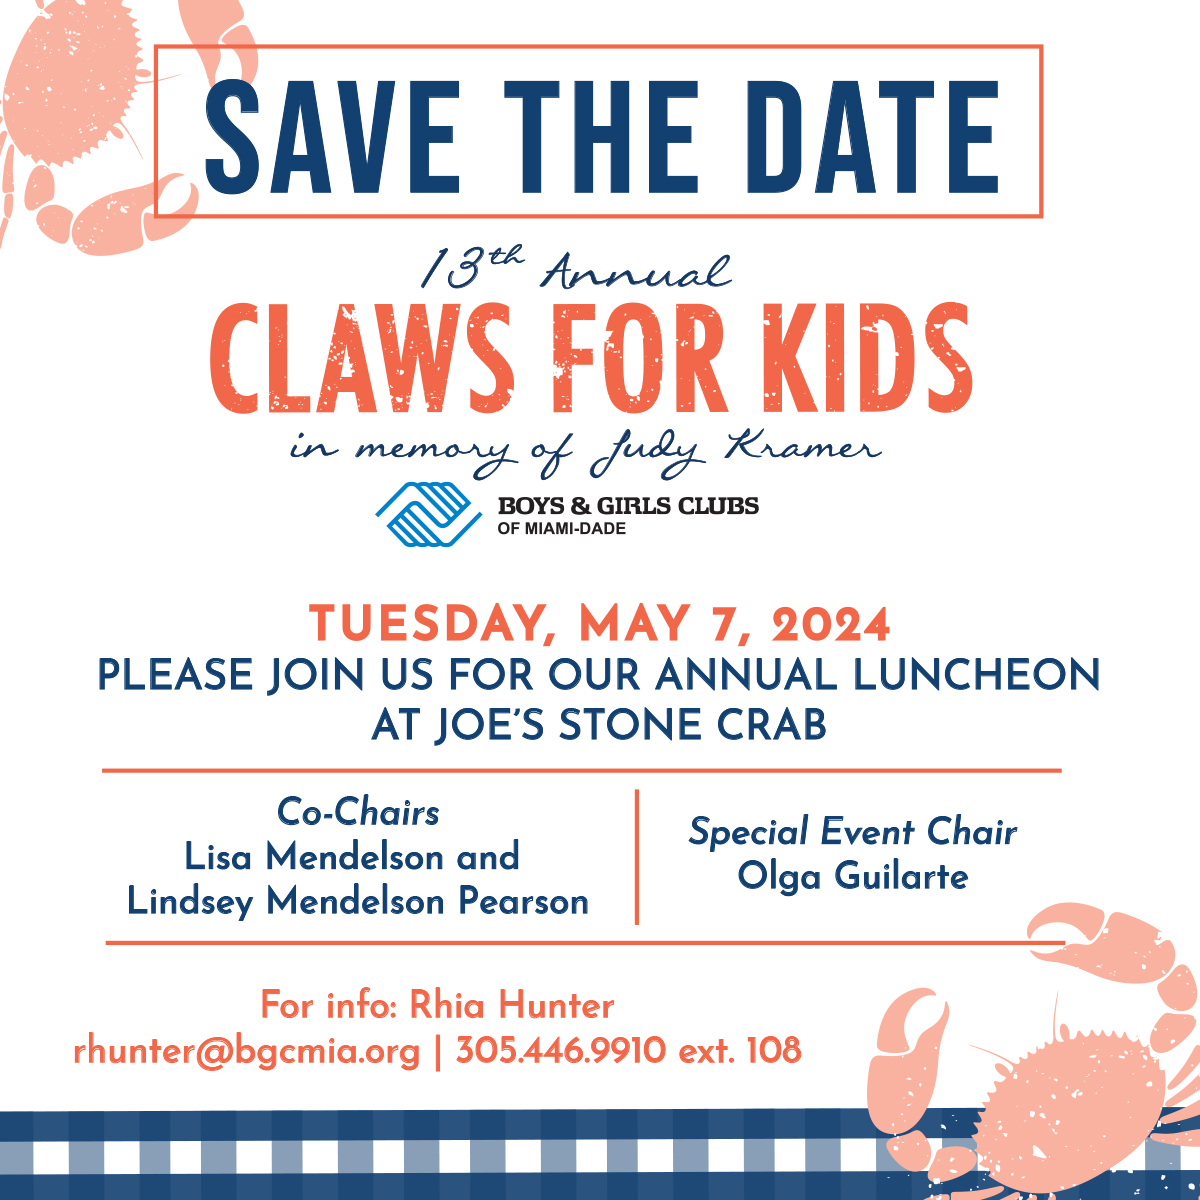 We're a week away from #BGCMIA's 'Claws for Kids' at @joesstonecrab. The event will kick off with a cocktail reception at 11 a.m. Guests will enjoy stone crabs and other signature items. The fundraising lunch is one of the last chances to enjoy stone crabs before the season ends.